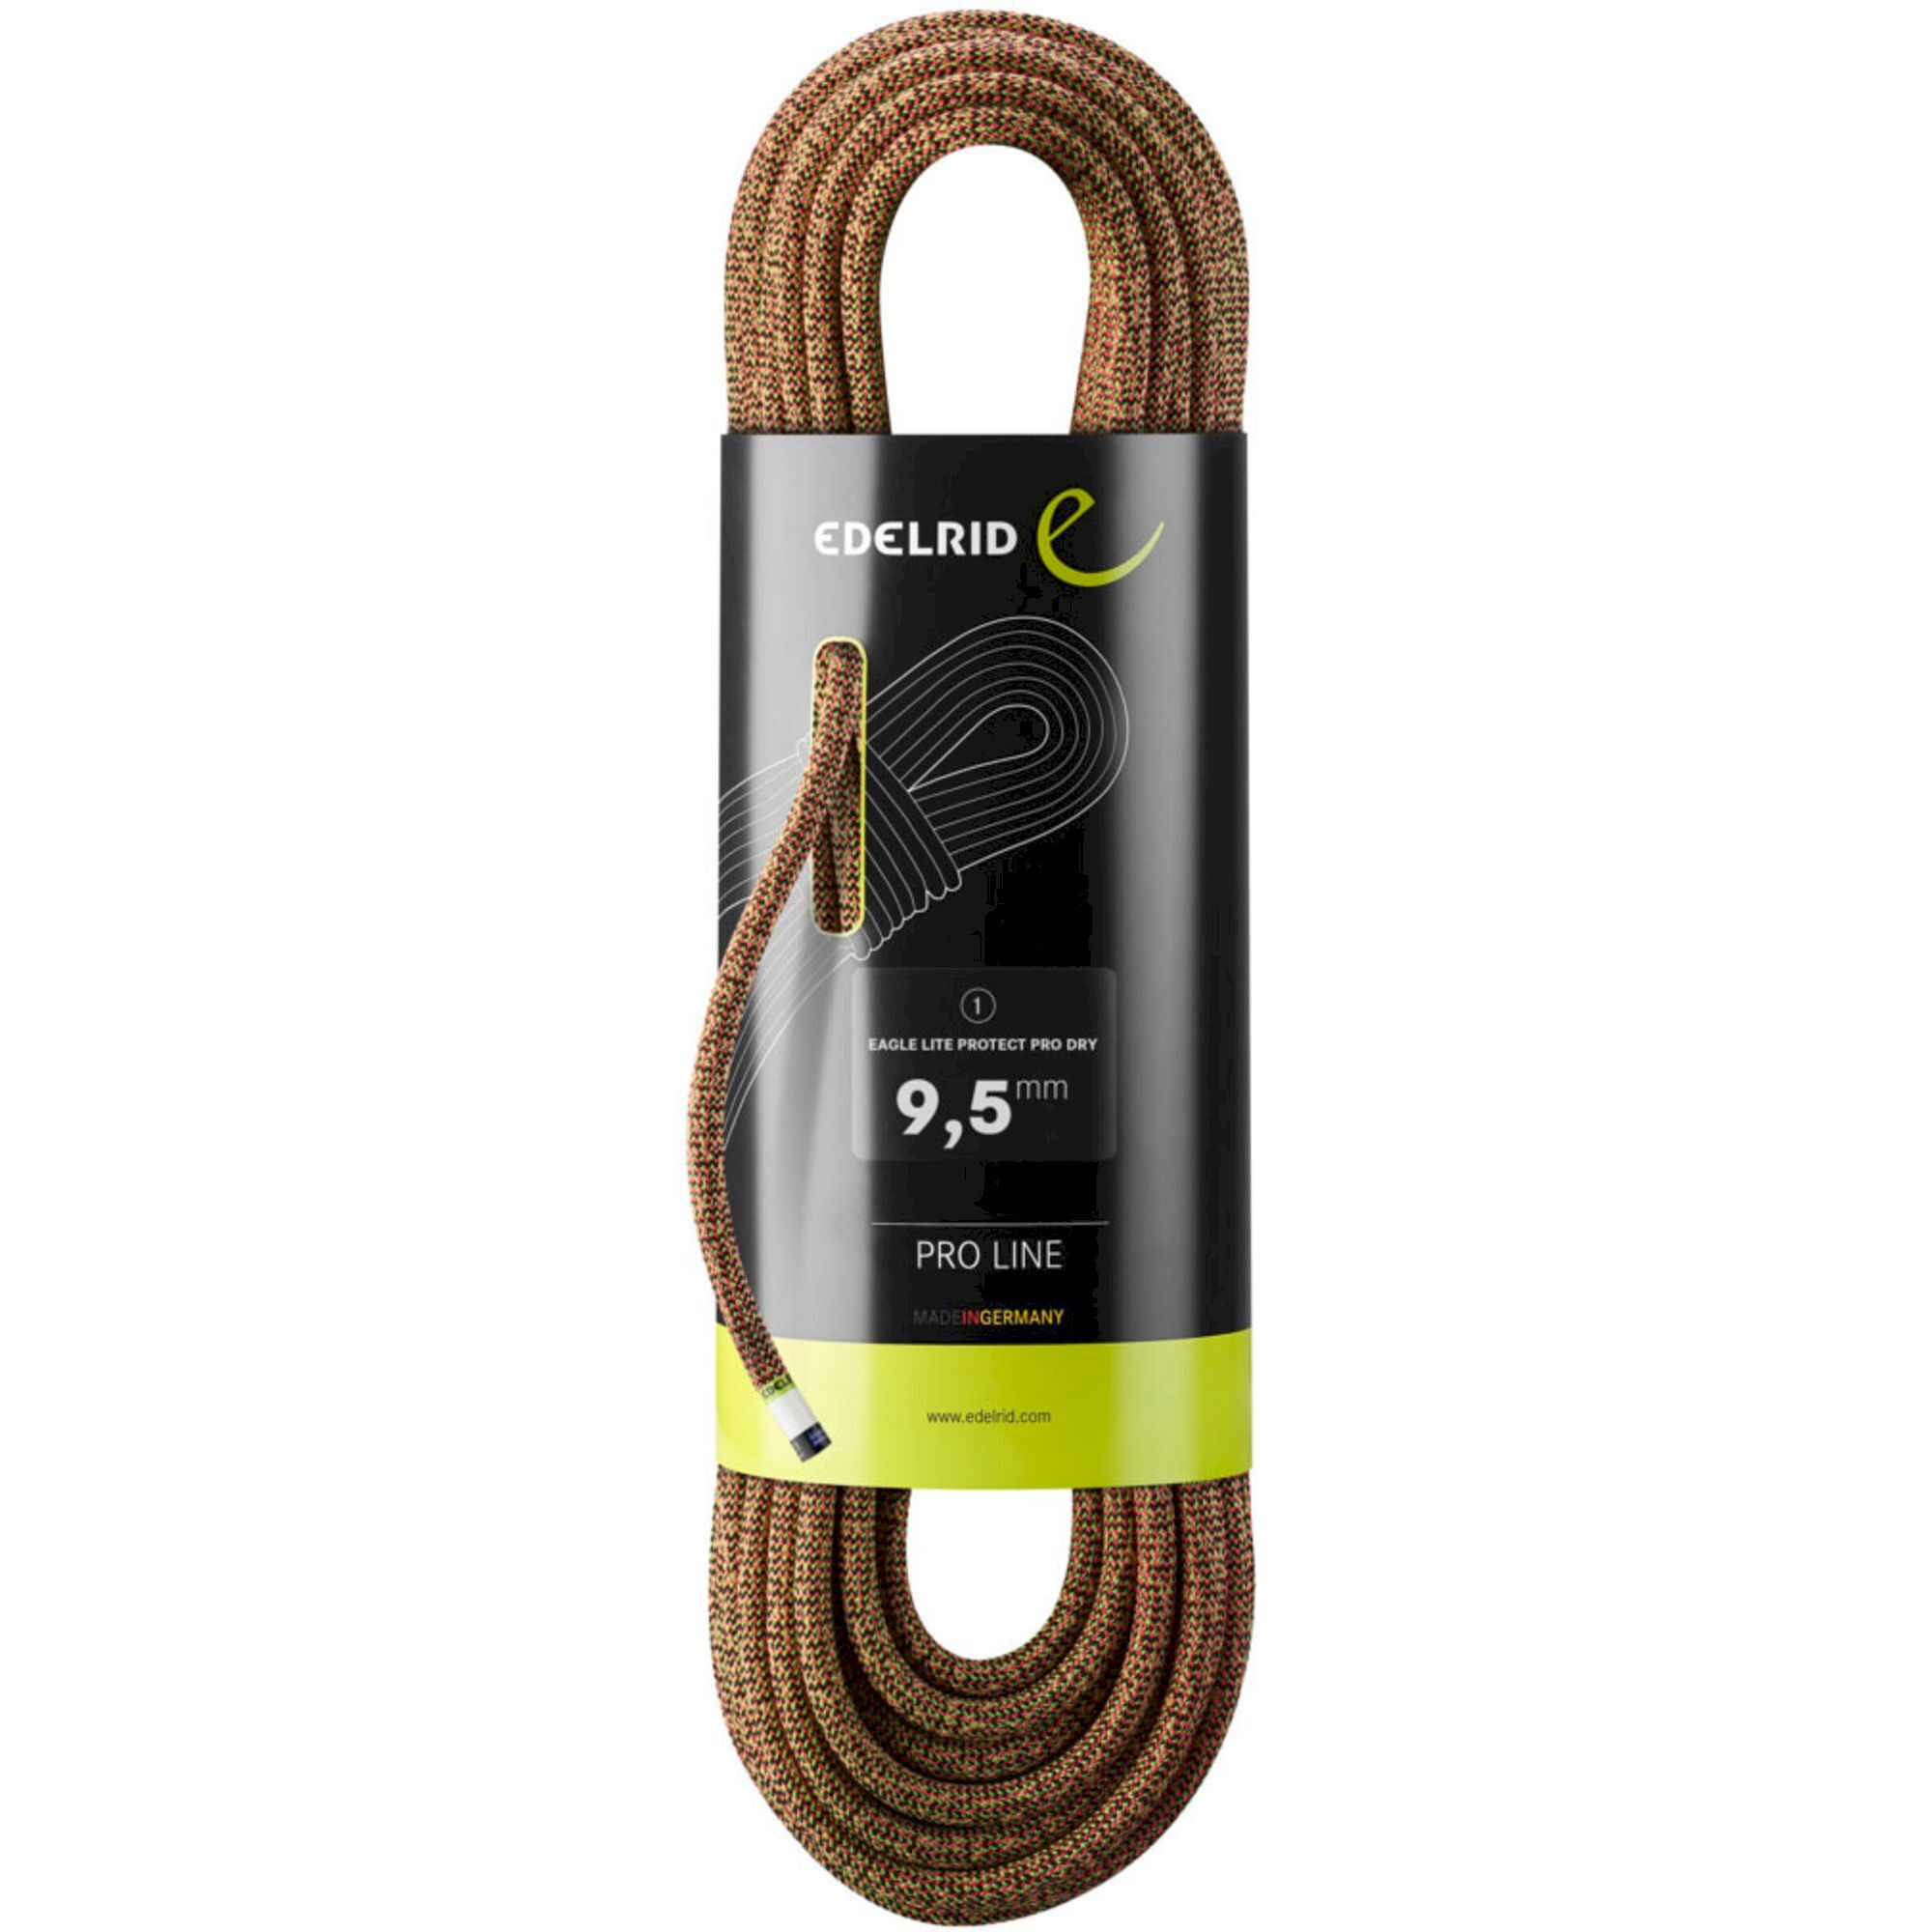 Edelrid Eagle Lite Protect Pro Dry 9,5 mm - Climbing rope